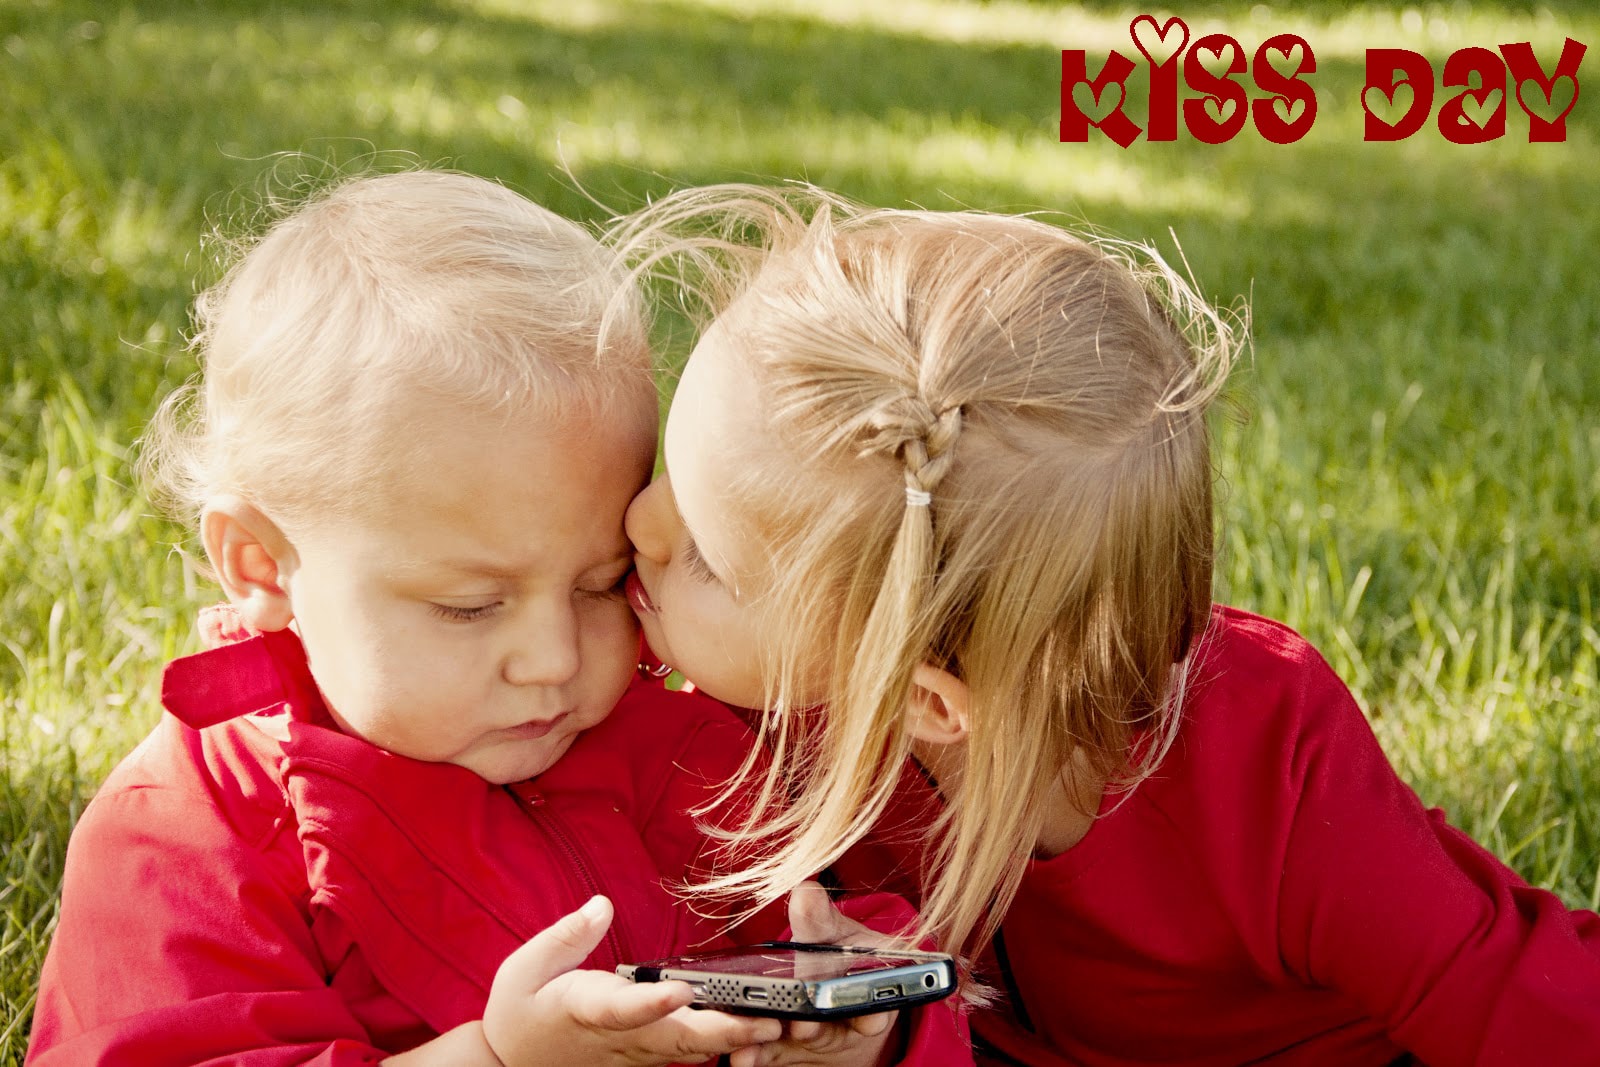 happy kiss day beautiful wallpapers,people in nature,child,sharing,toddler,love